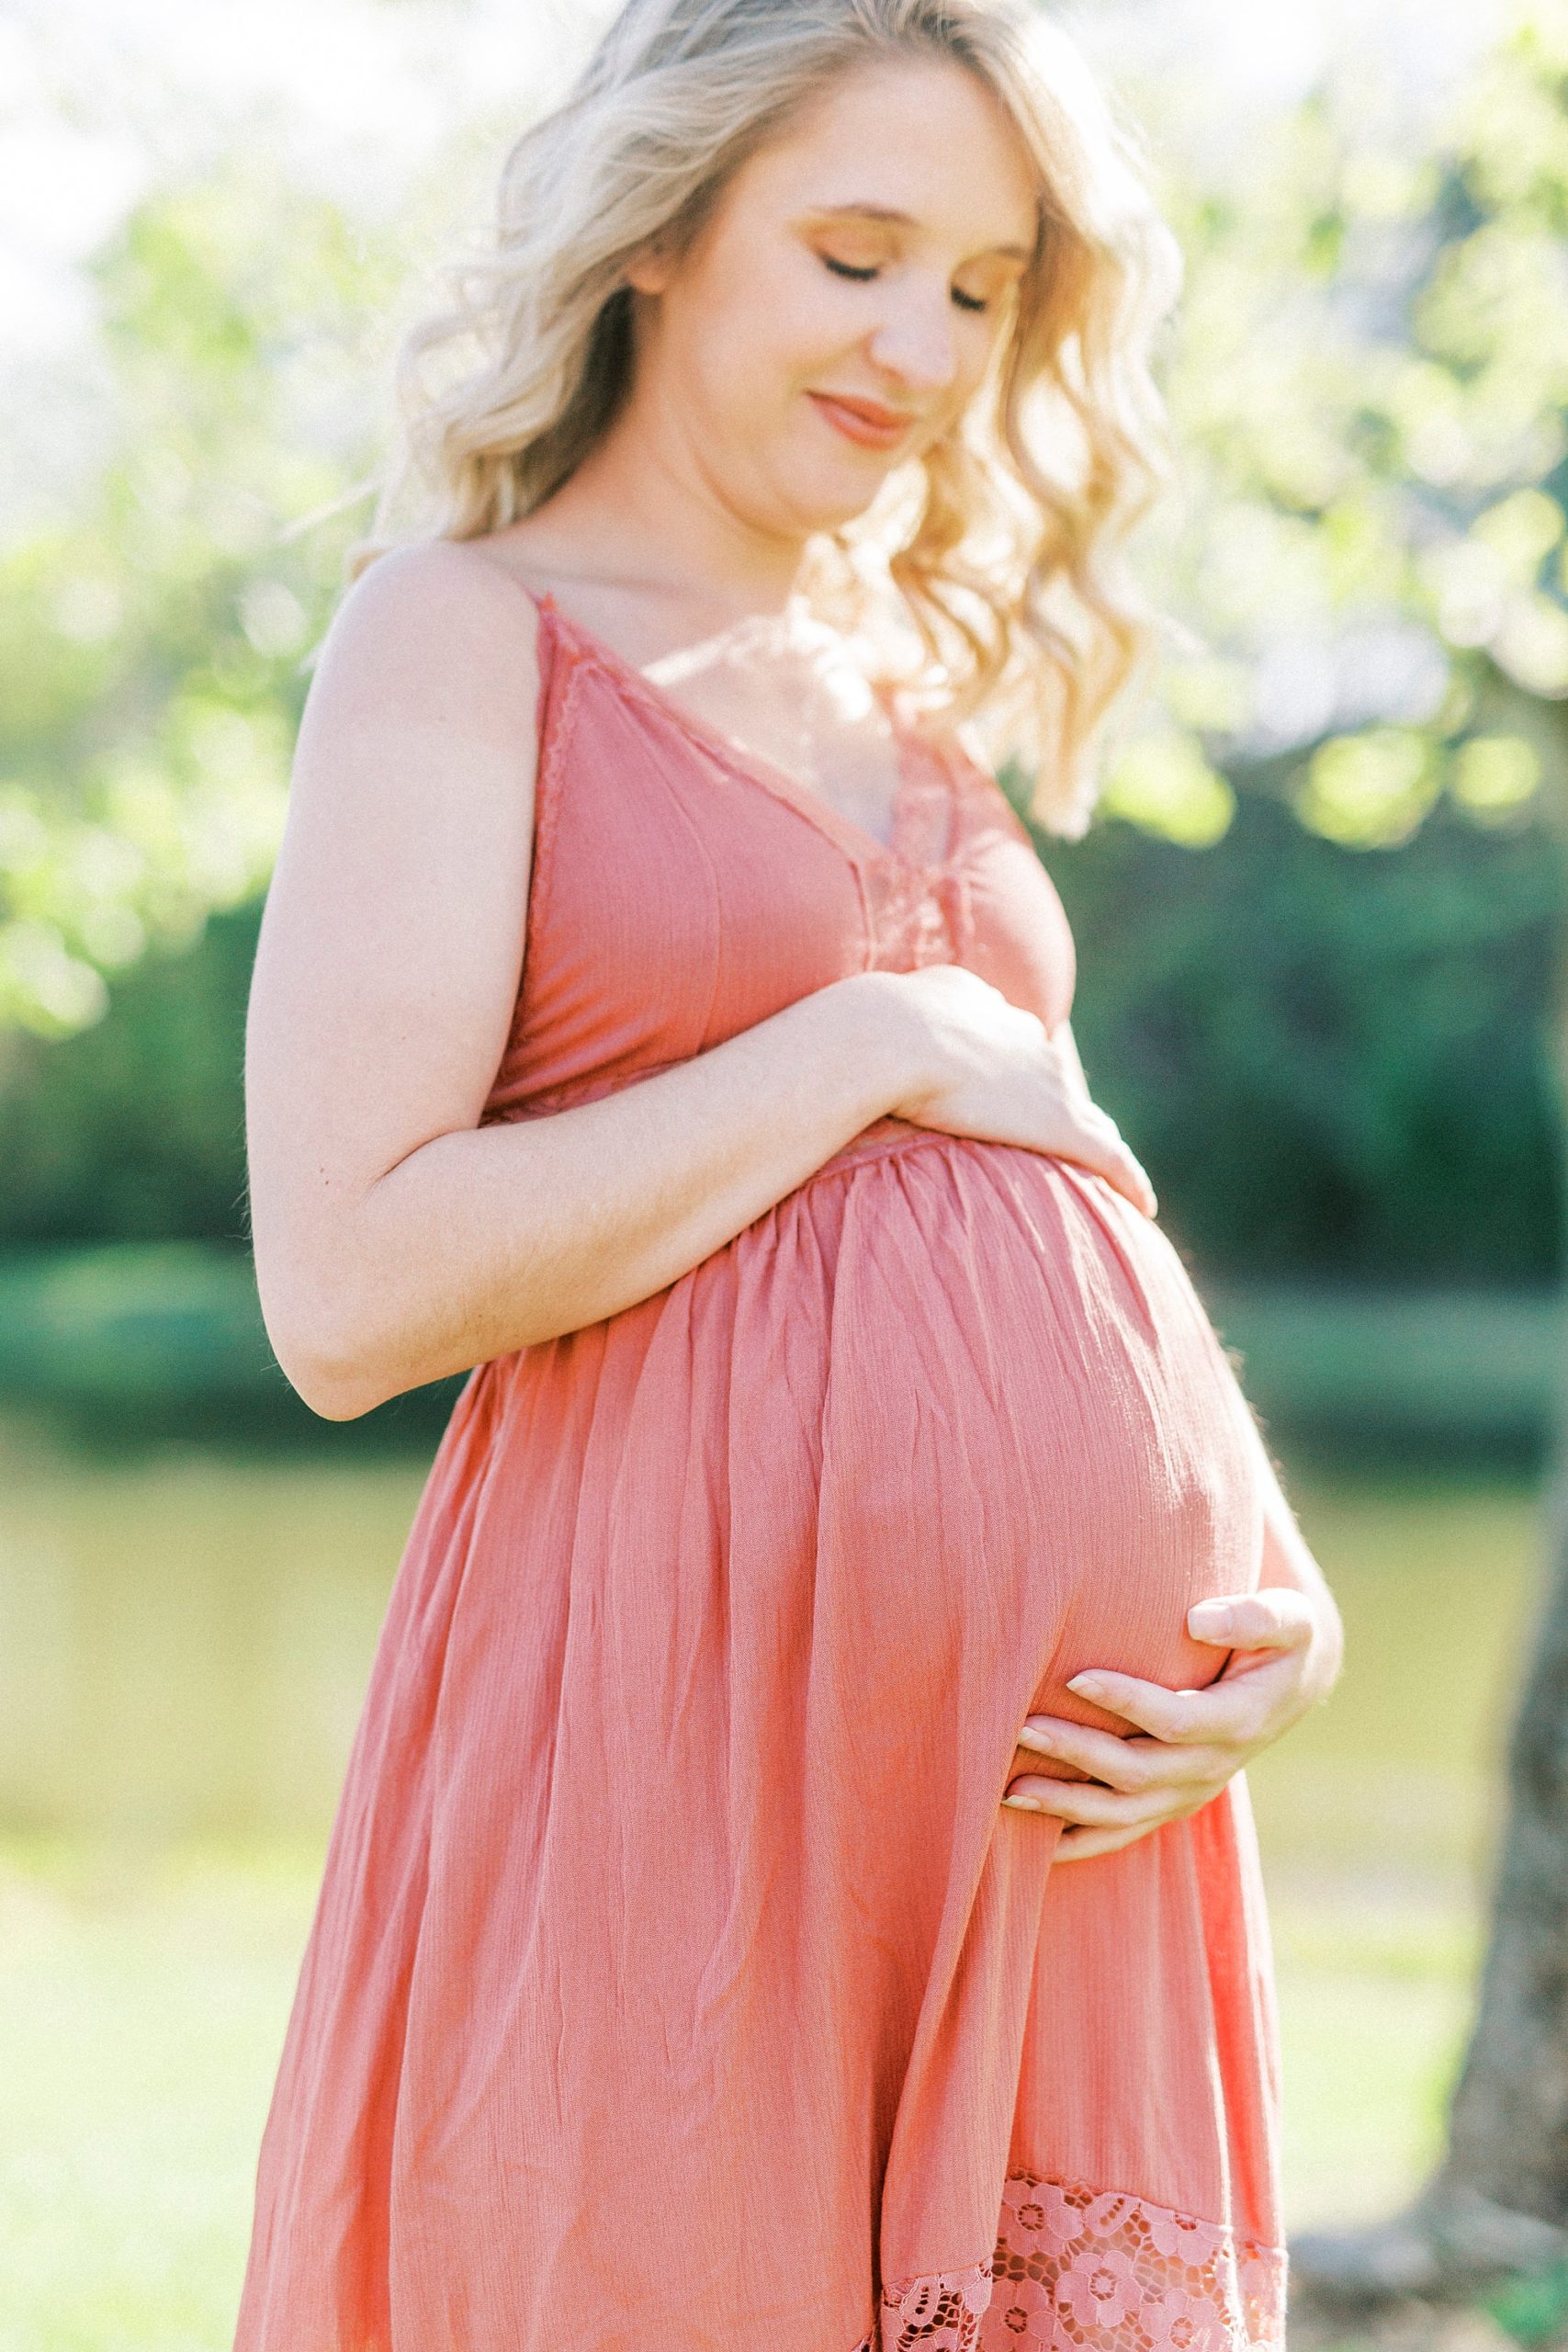 expecting mother holds belly in pink sundress and looks down